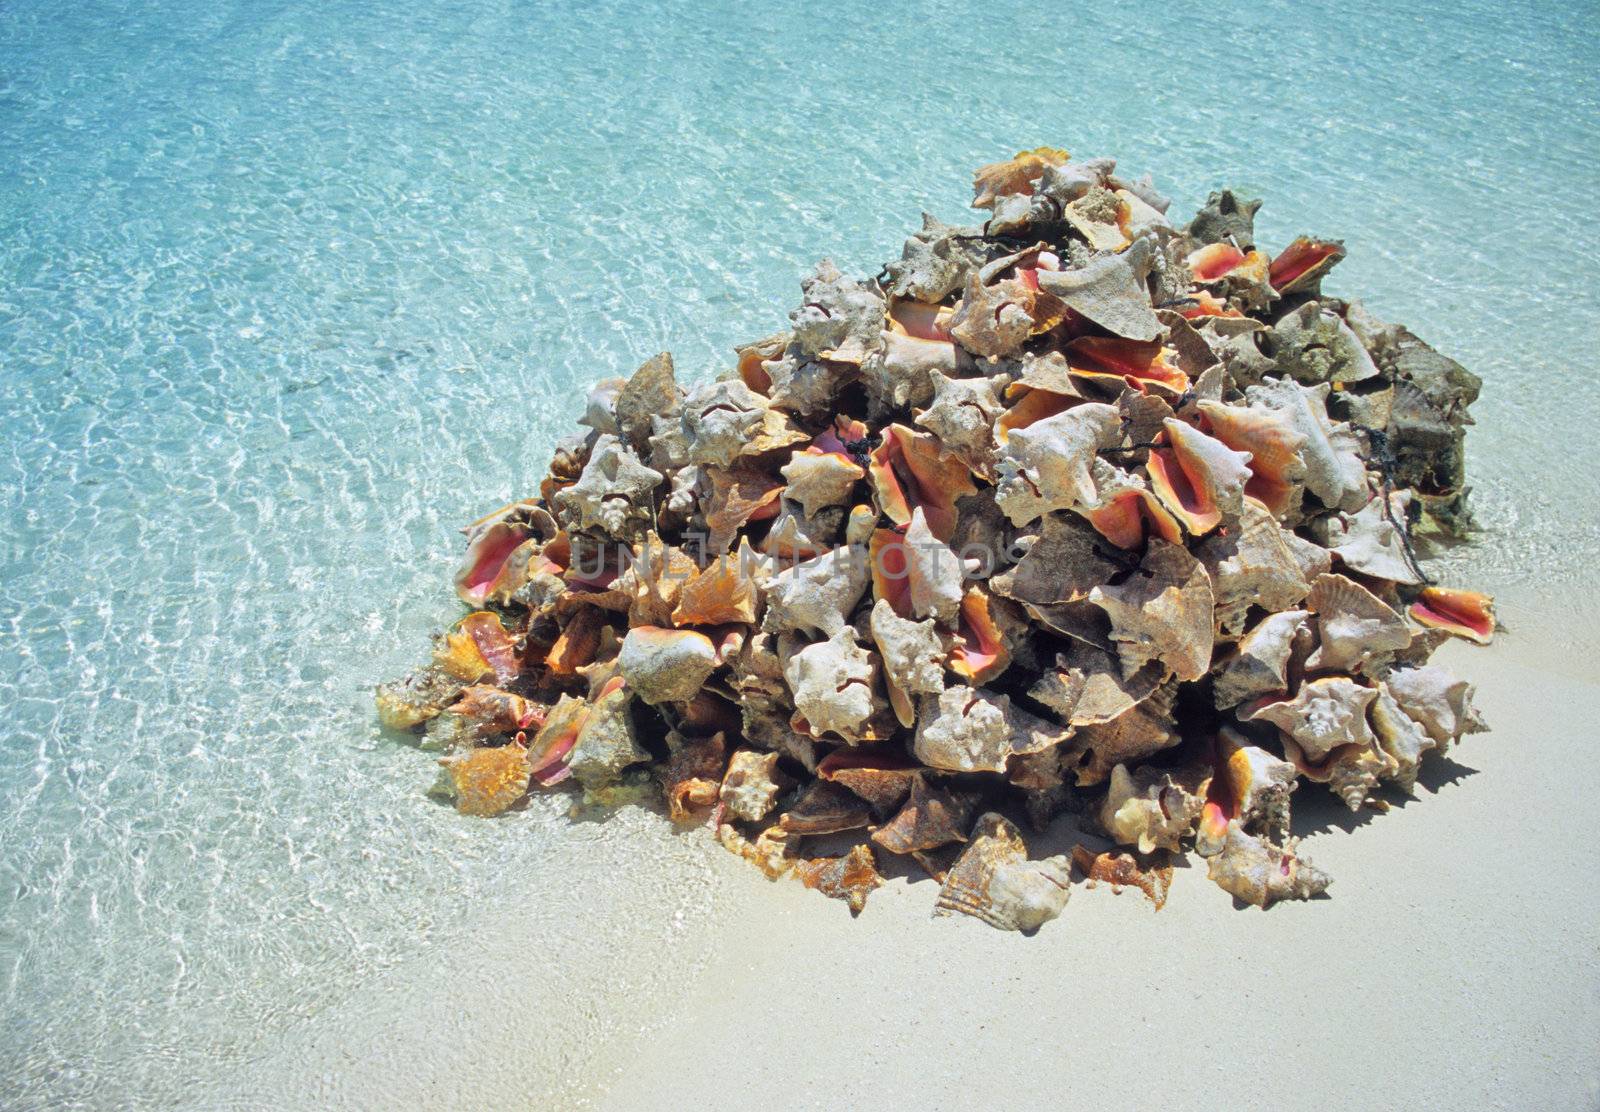 Pile of conch shells by ACMPhoto